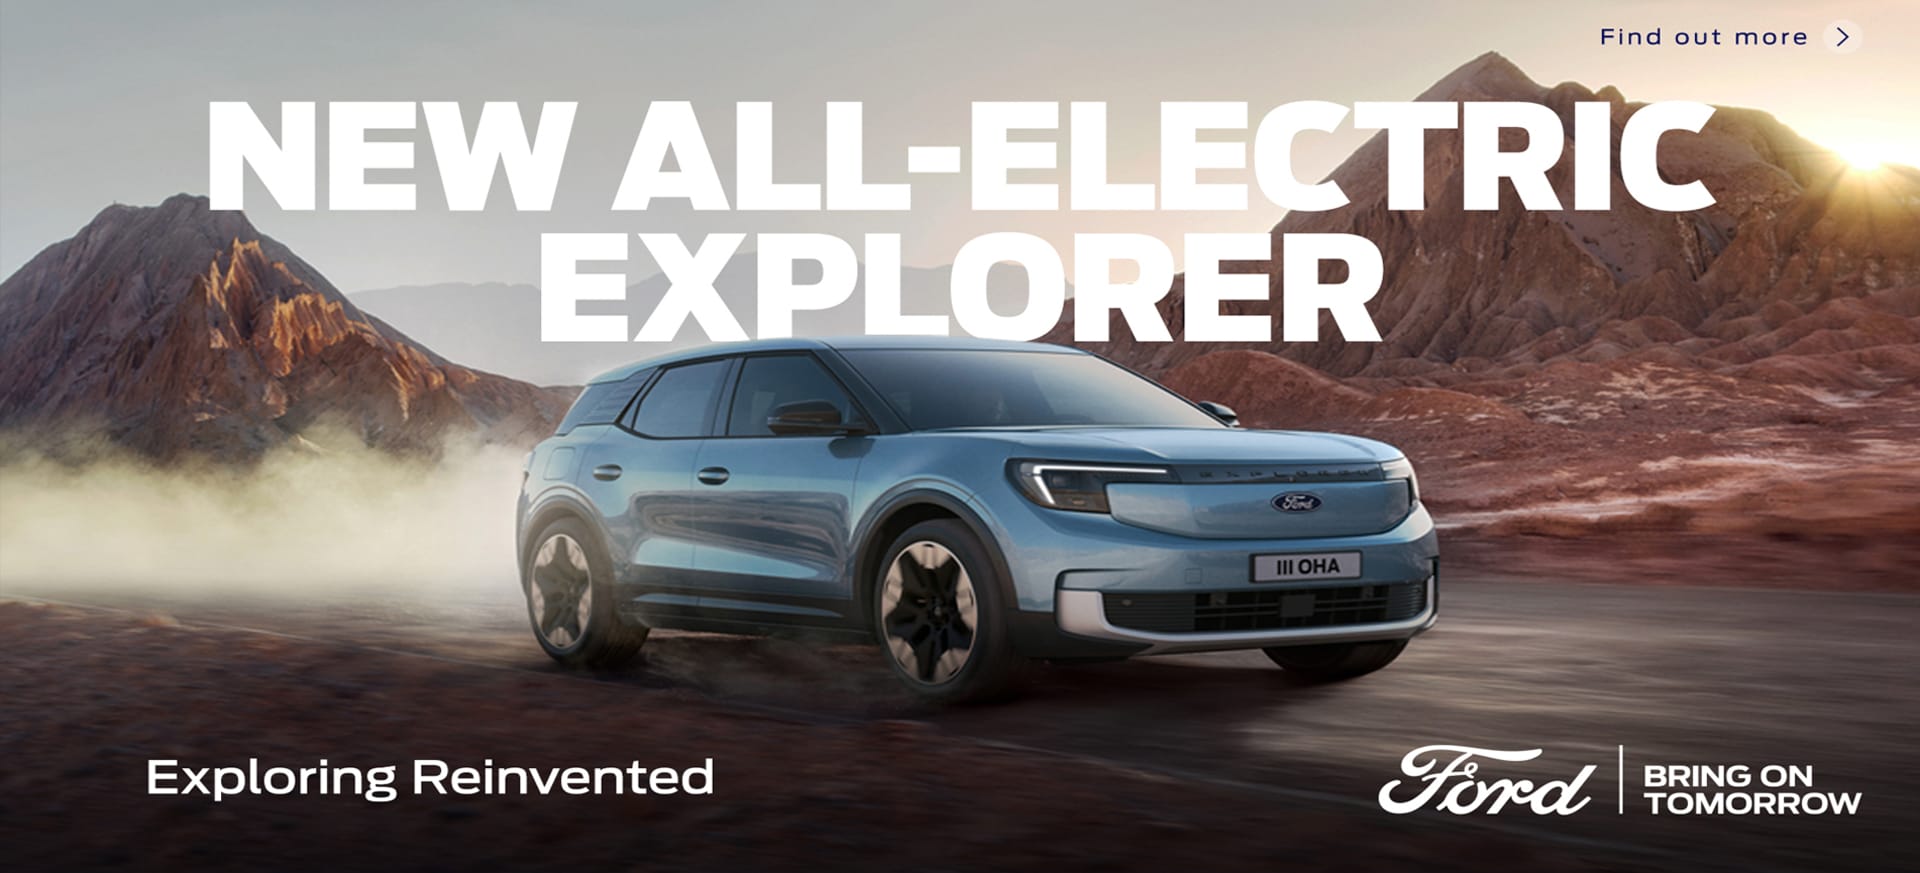 All-New Electric Explorer